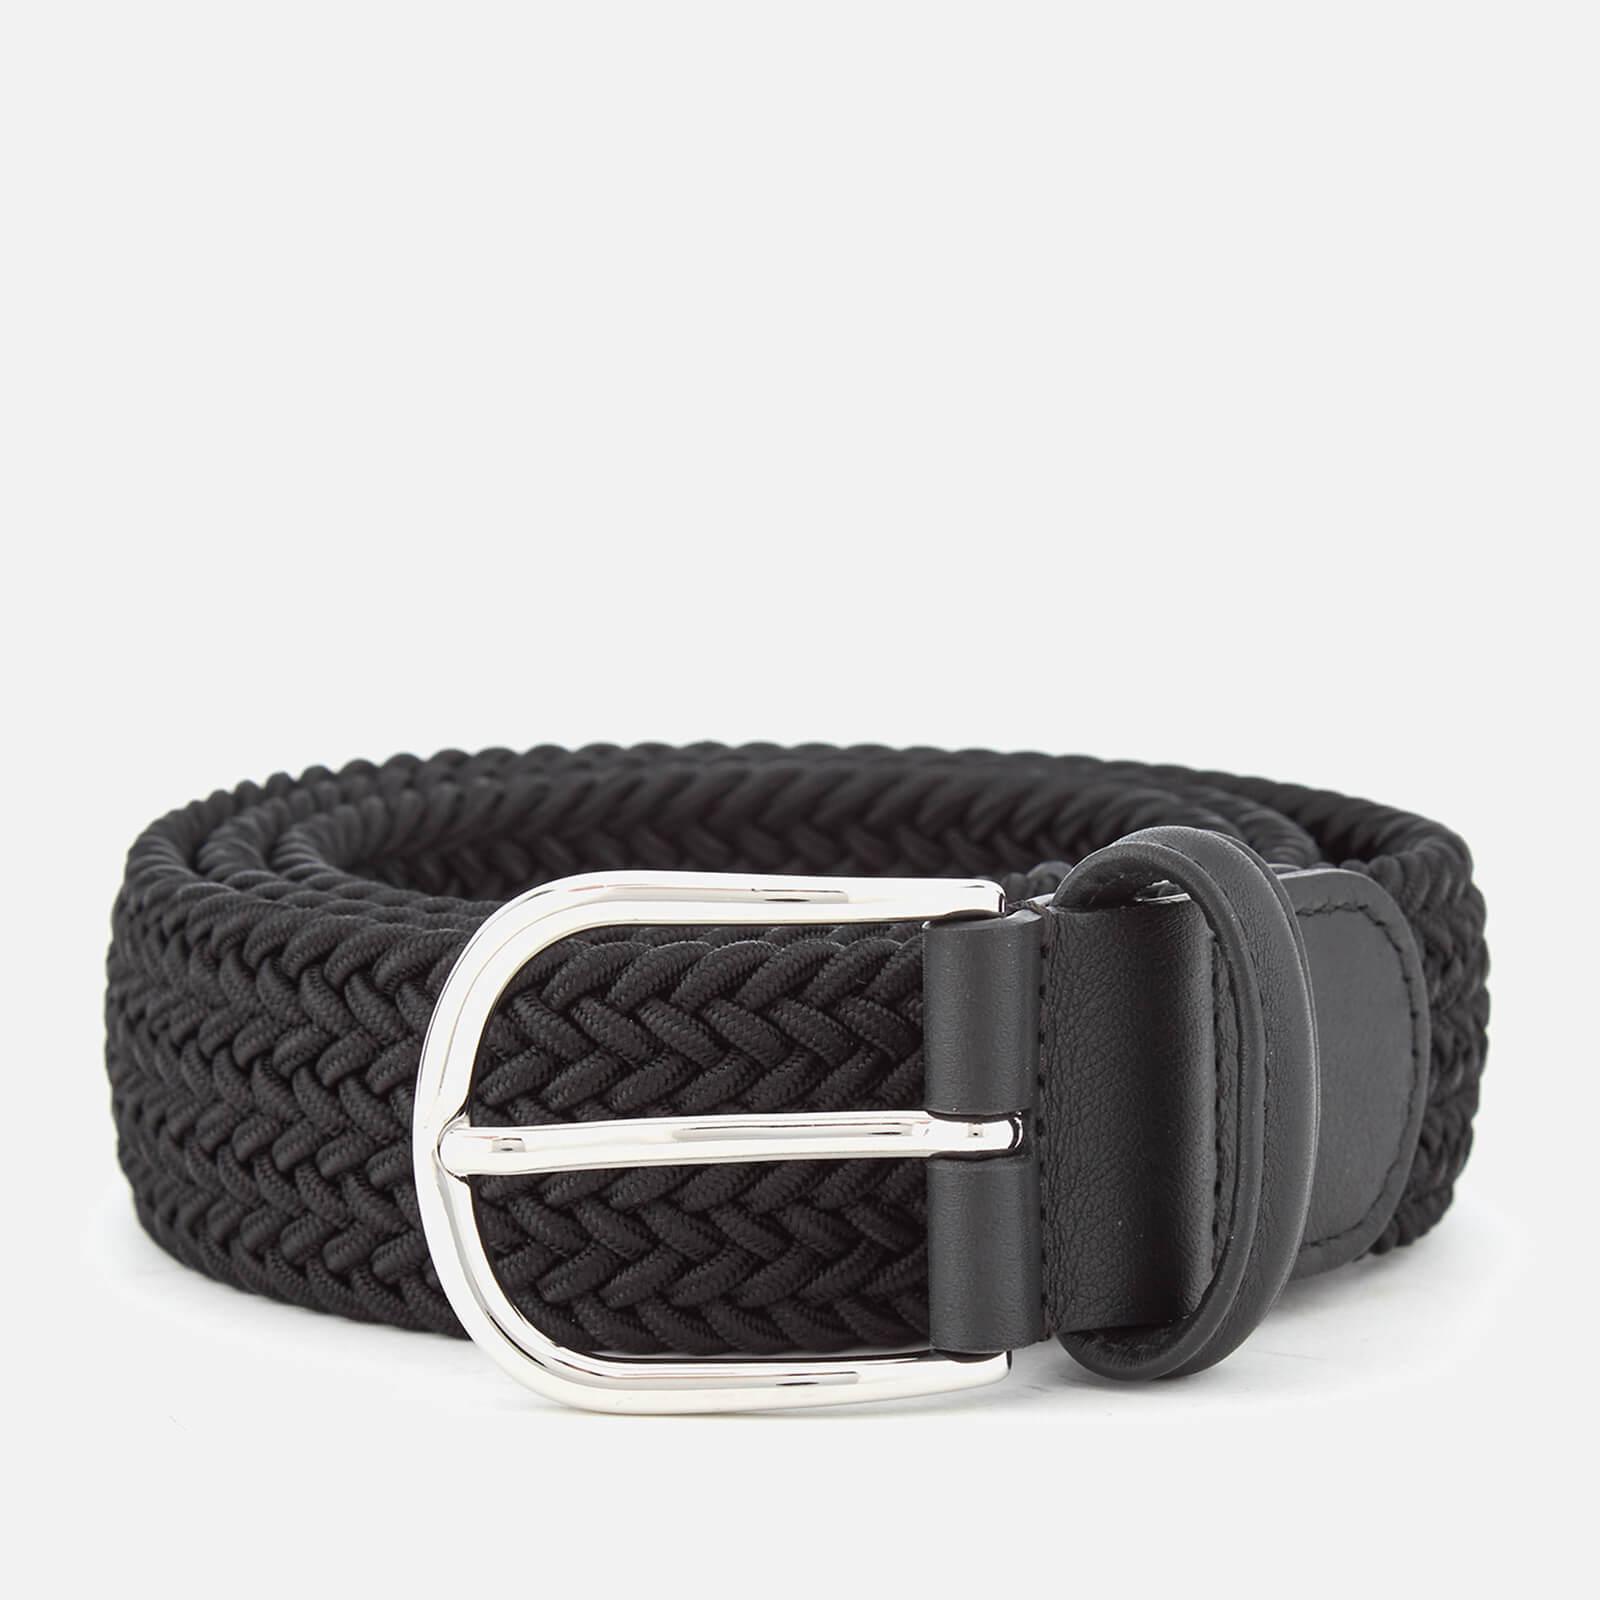 Andersons Leather Men's Core Woven Fabric Belt in Black for Men - Lyst